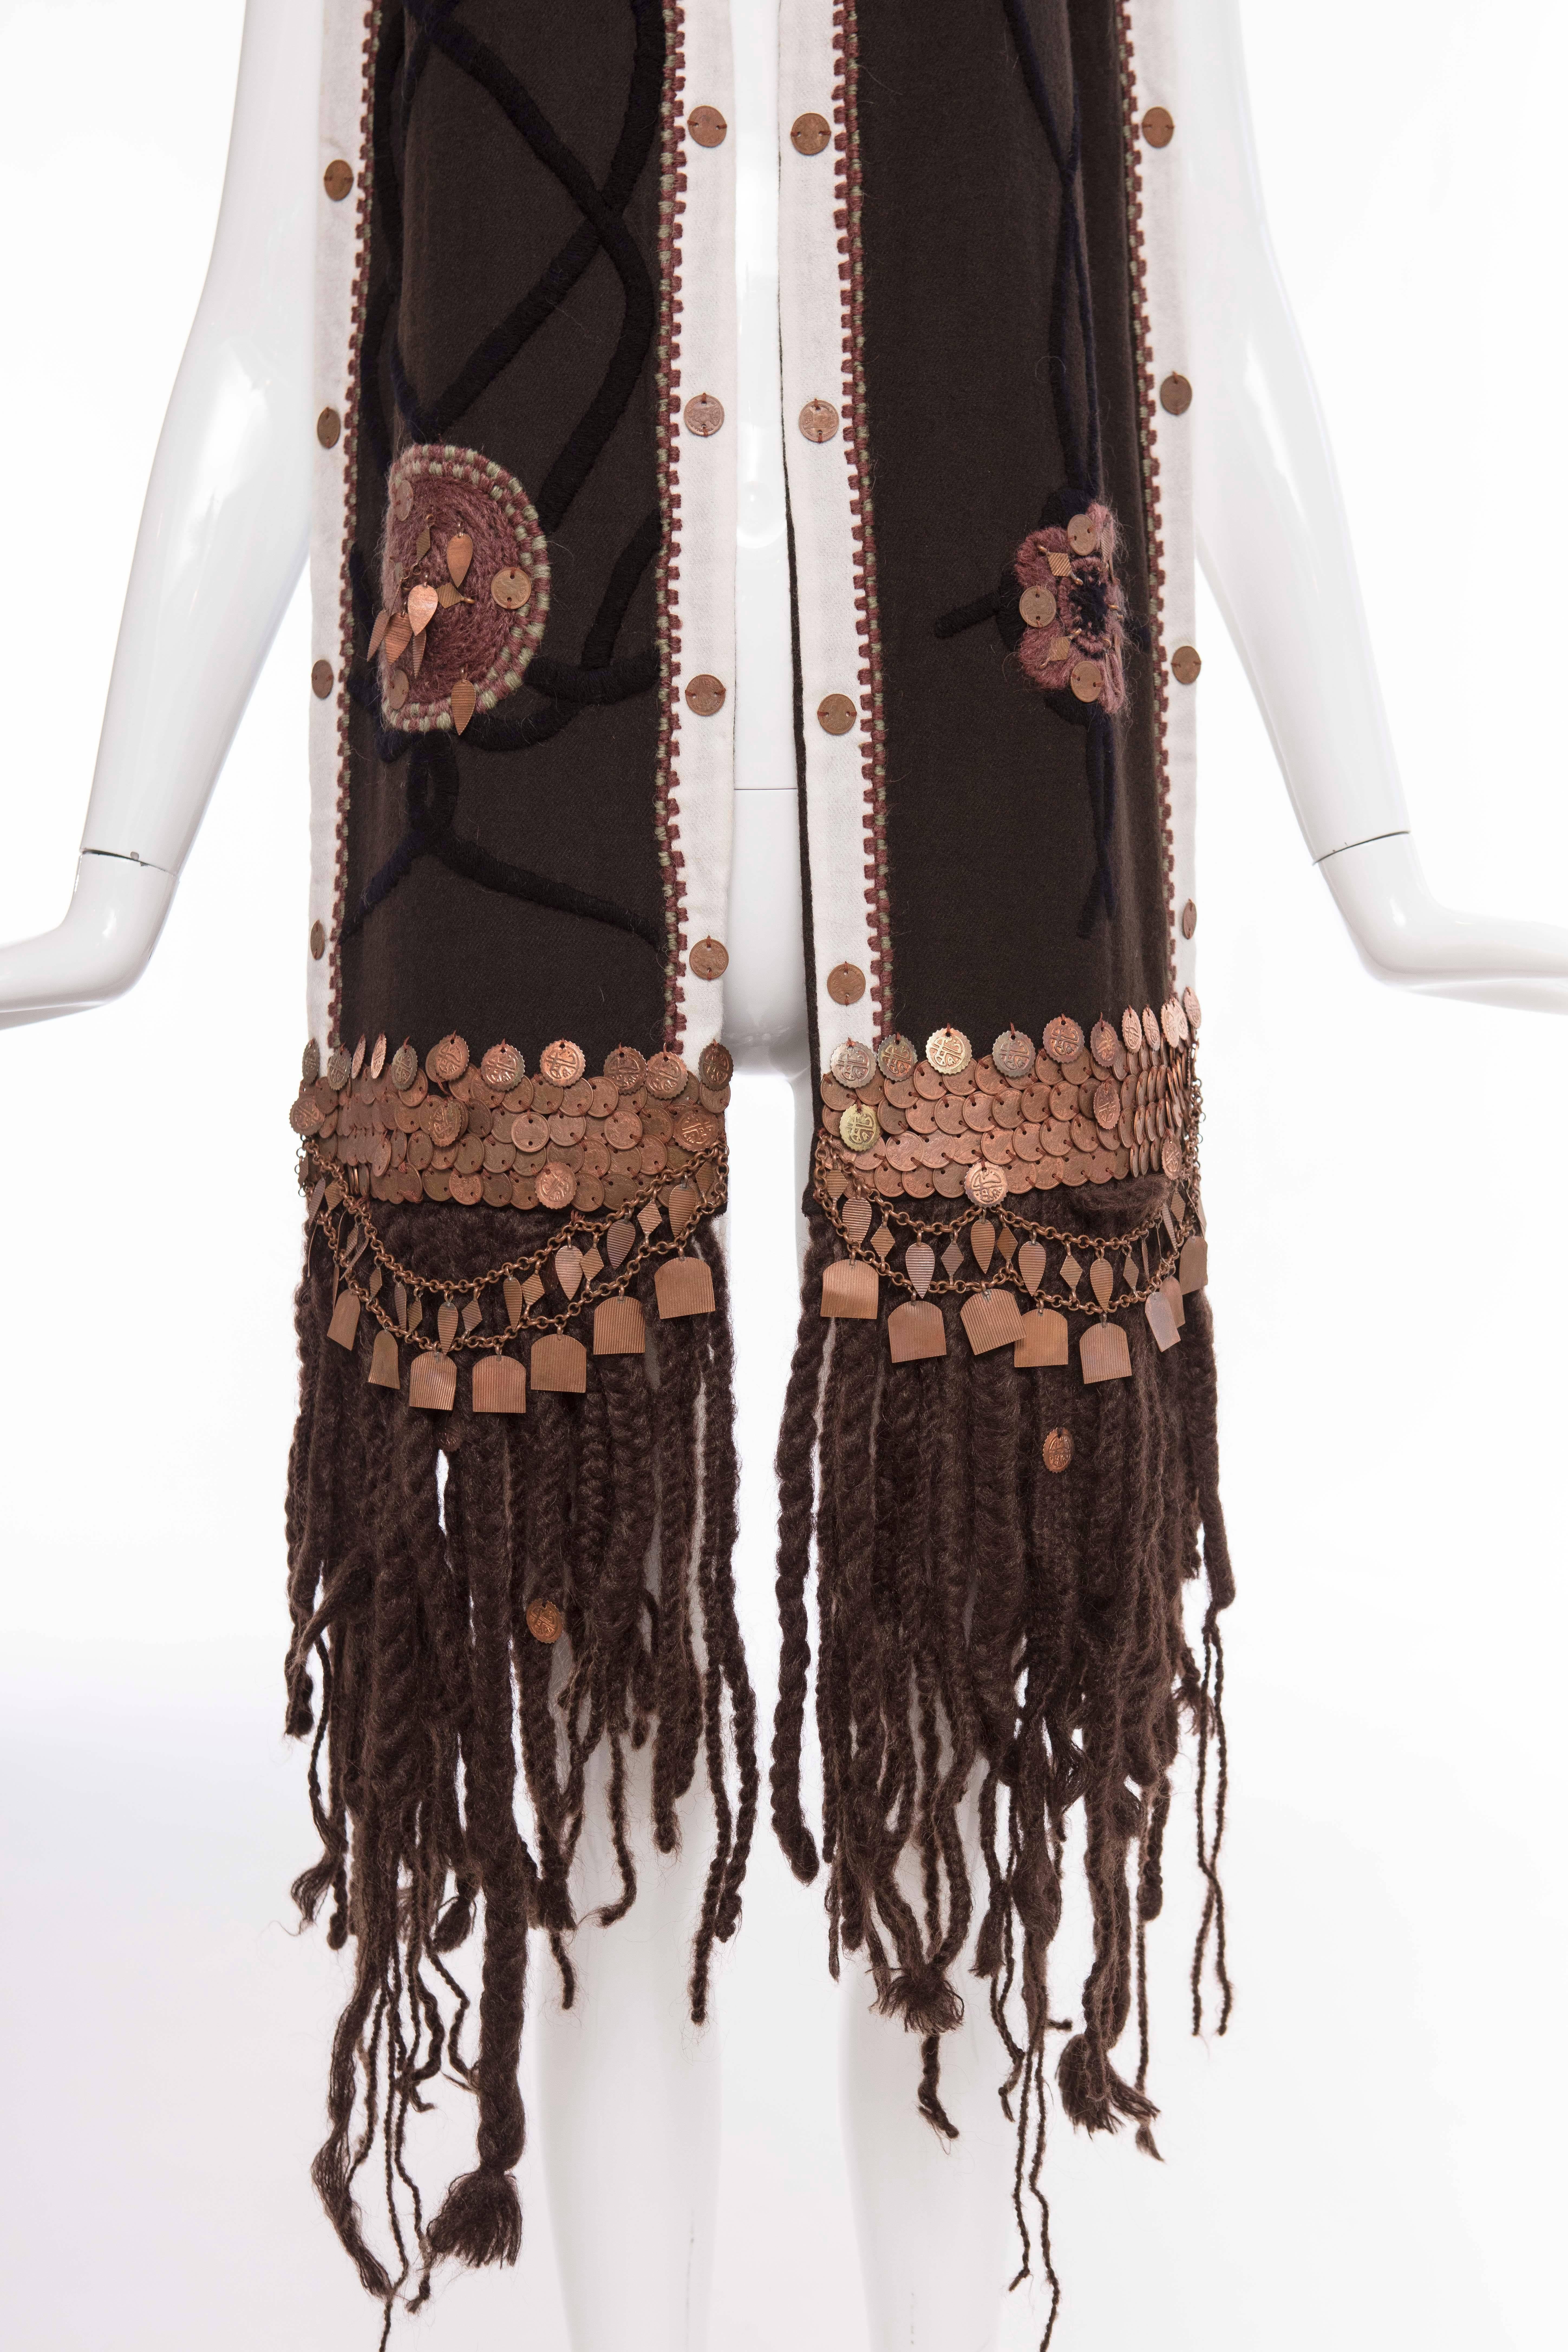 Dries Van Noten, Autumn-Winter 2002, embroidered scarf with antiqued copper-coin embellishments throughout and long braided fringe-trim at ends.

Length 80, Width 10